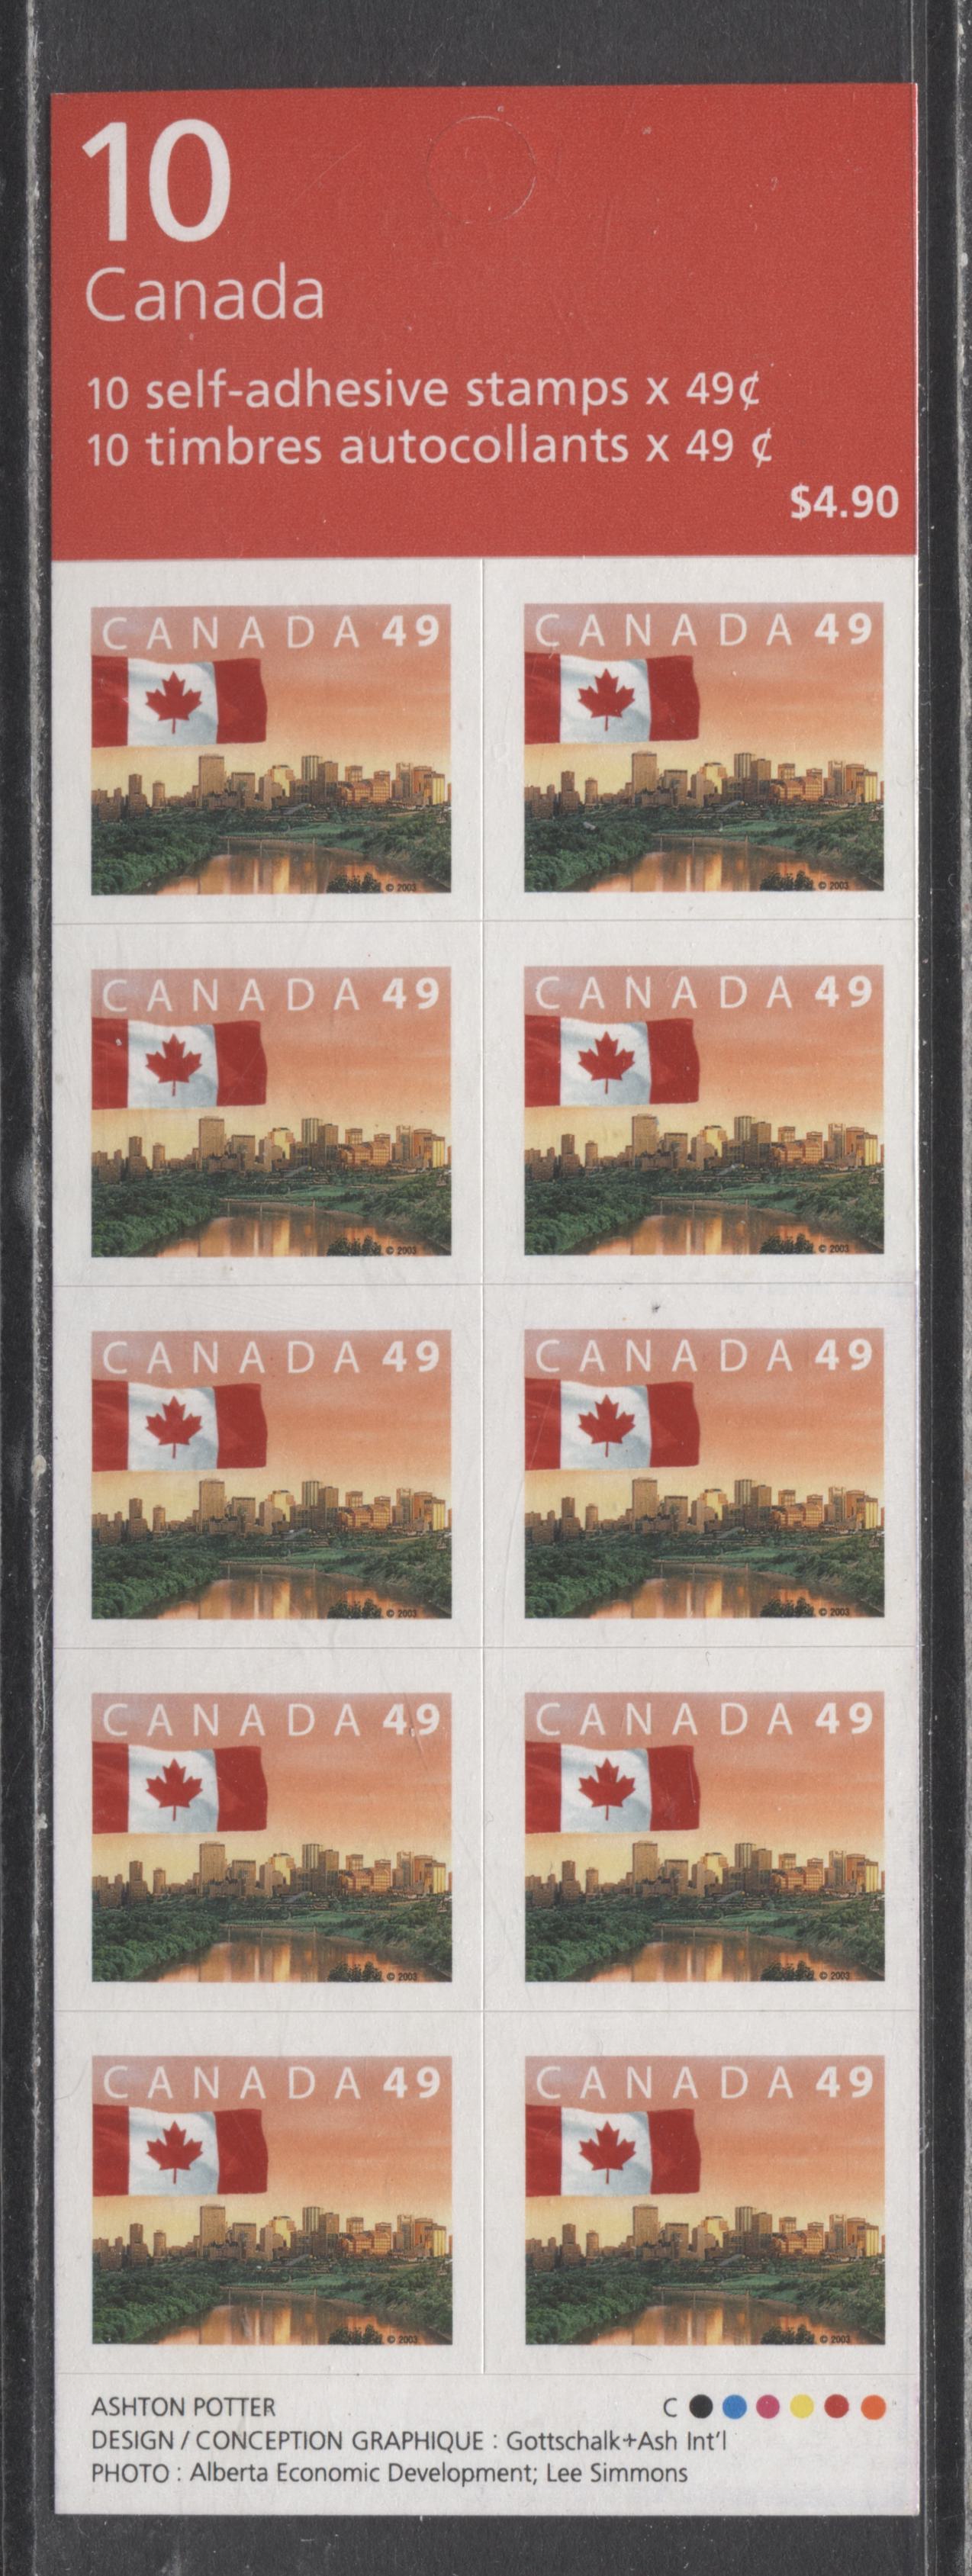 Lot 2 Canada #BK280 49c Multicolored Flag Over Edmonton, 2003-2004 Definitive Issues, A VFNH Booklet Of 10 On TRC Paper, DF/HF With Narrow Roulette, Barcode Ending In 02799 4, Weak Tagging, Tag Splotches om 1/2 and 2/1, $11